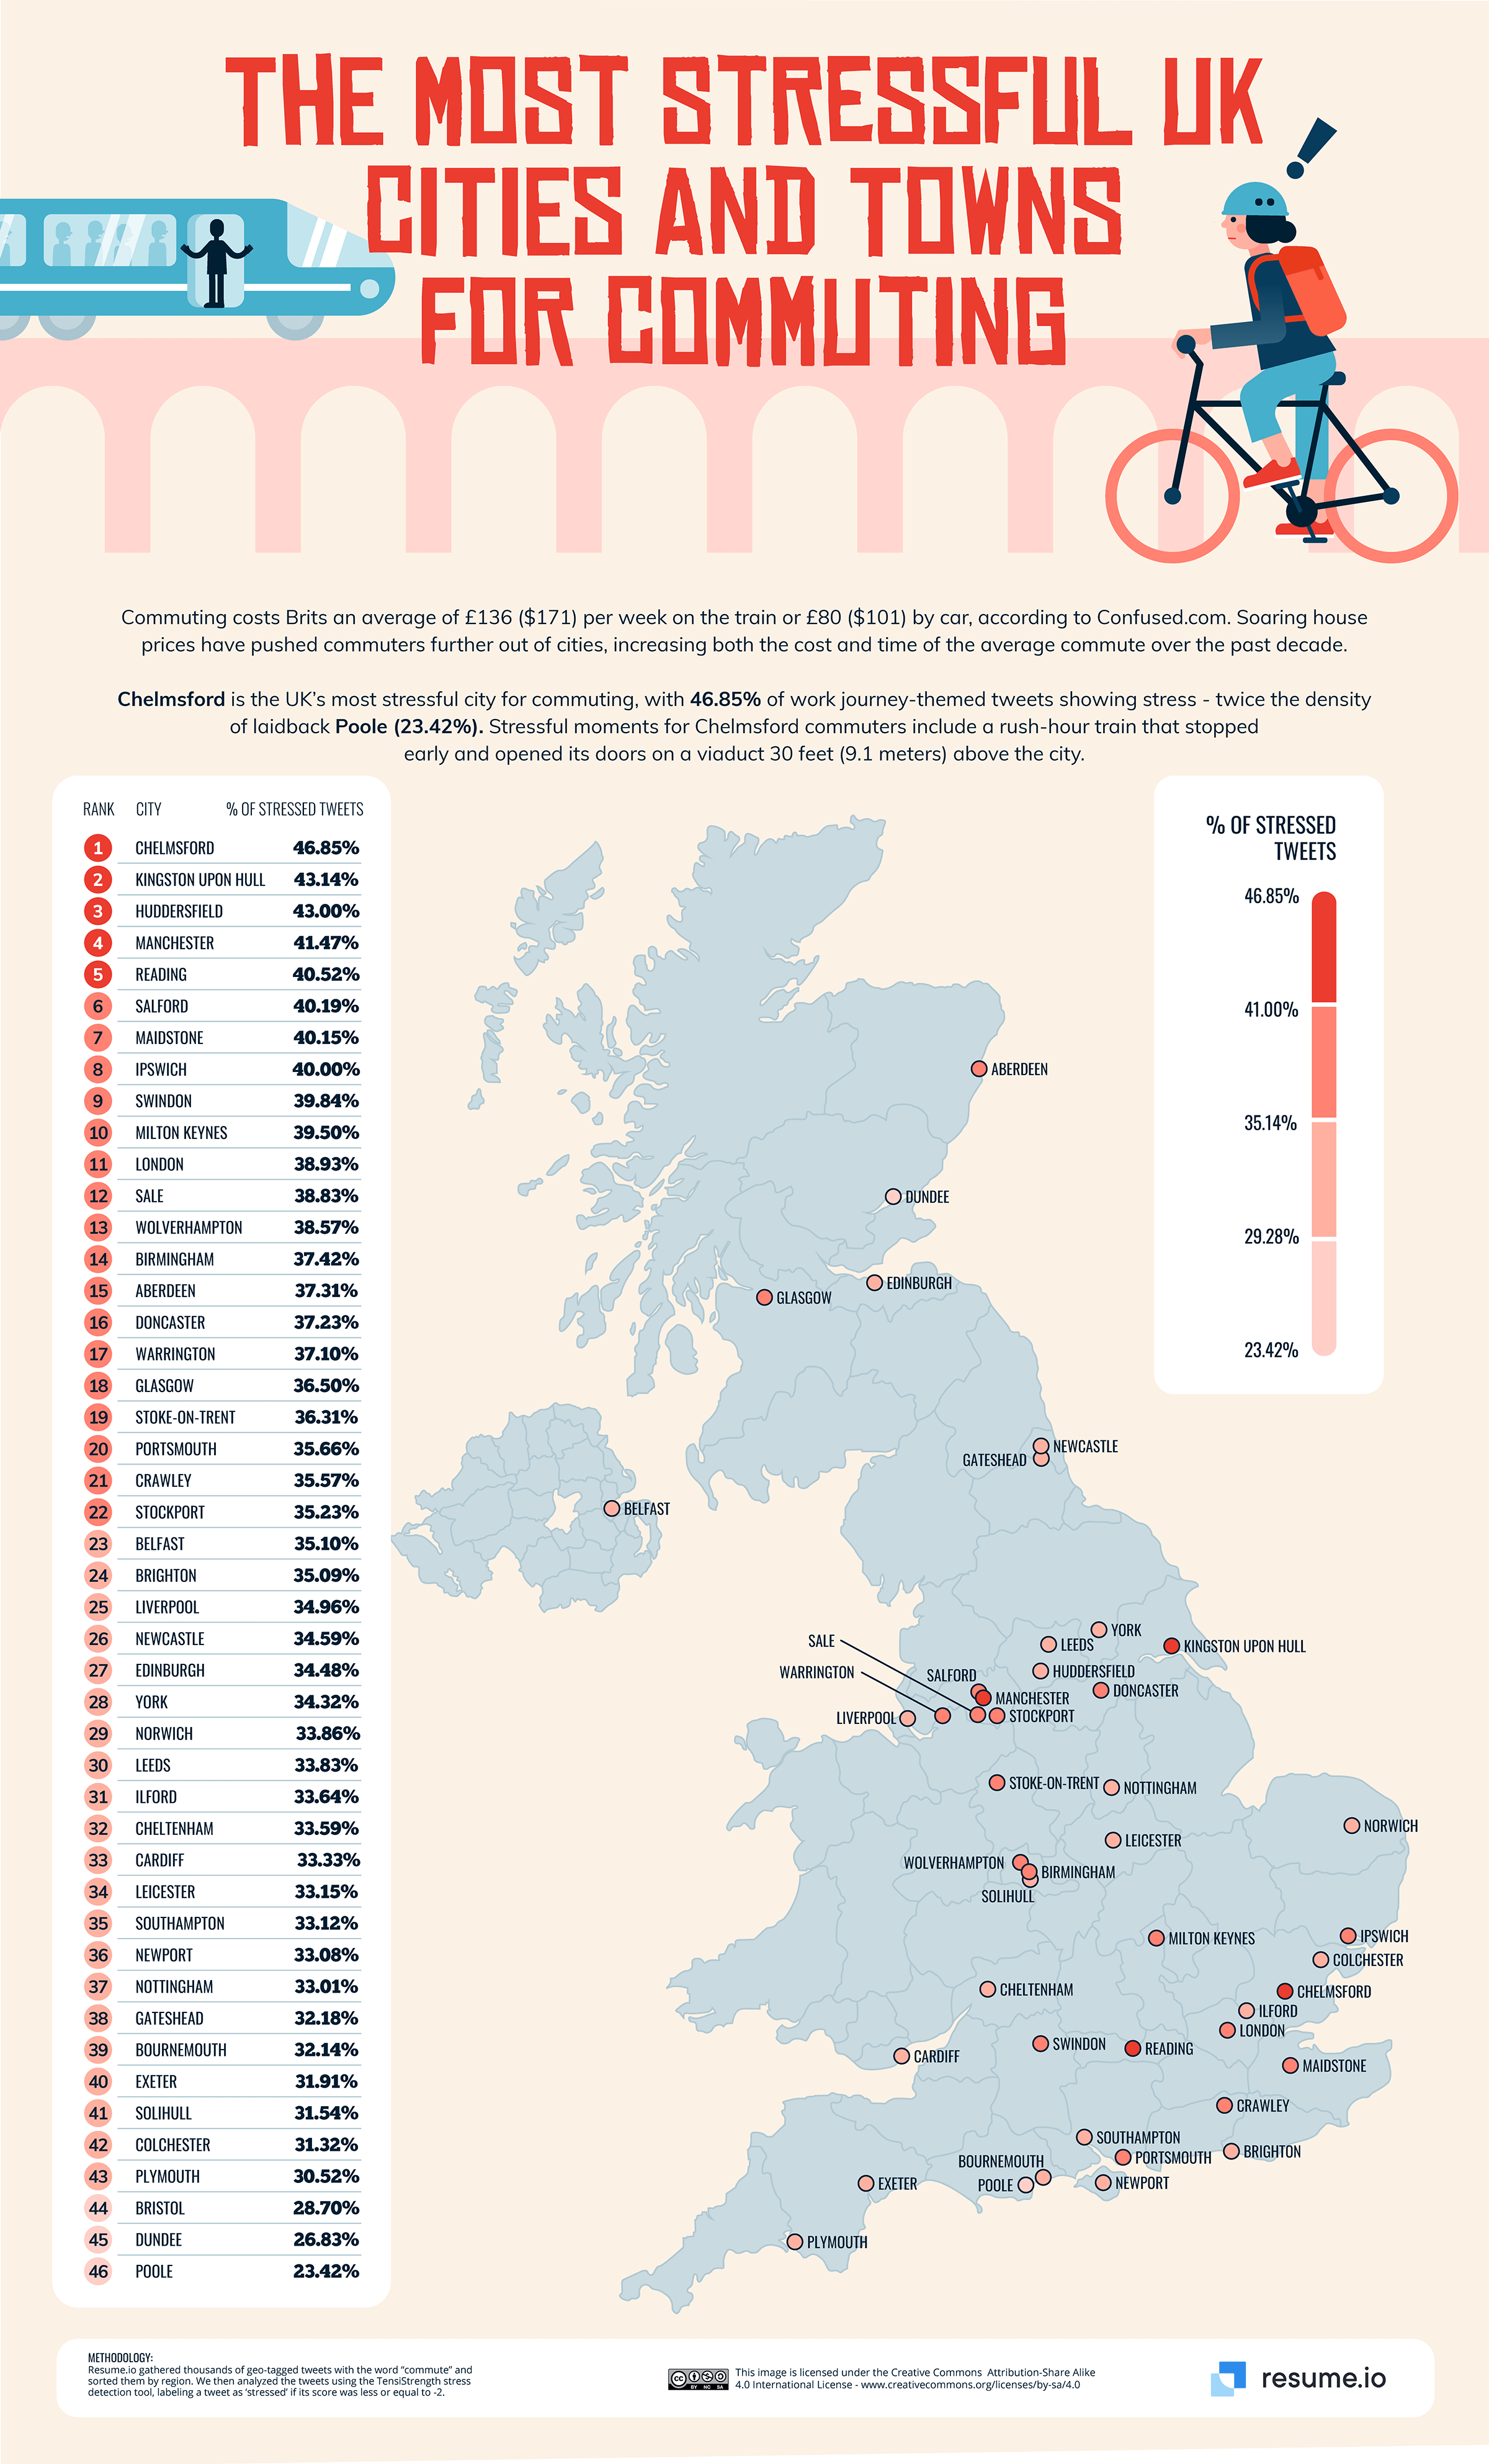 The most stressful UK Cities and towns for commuting.